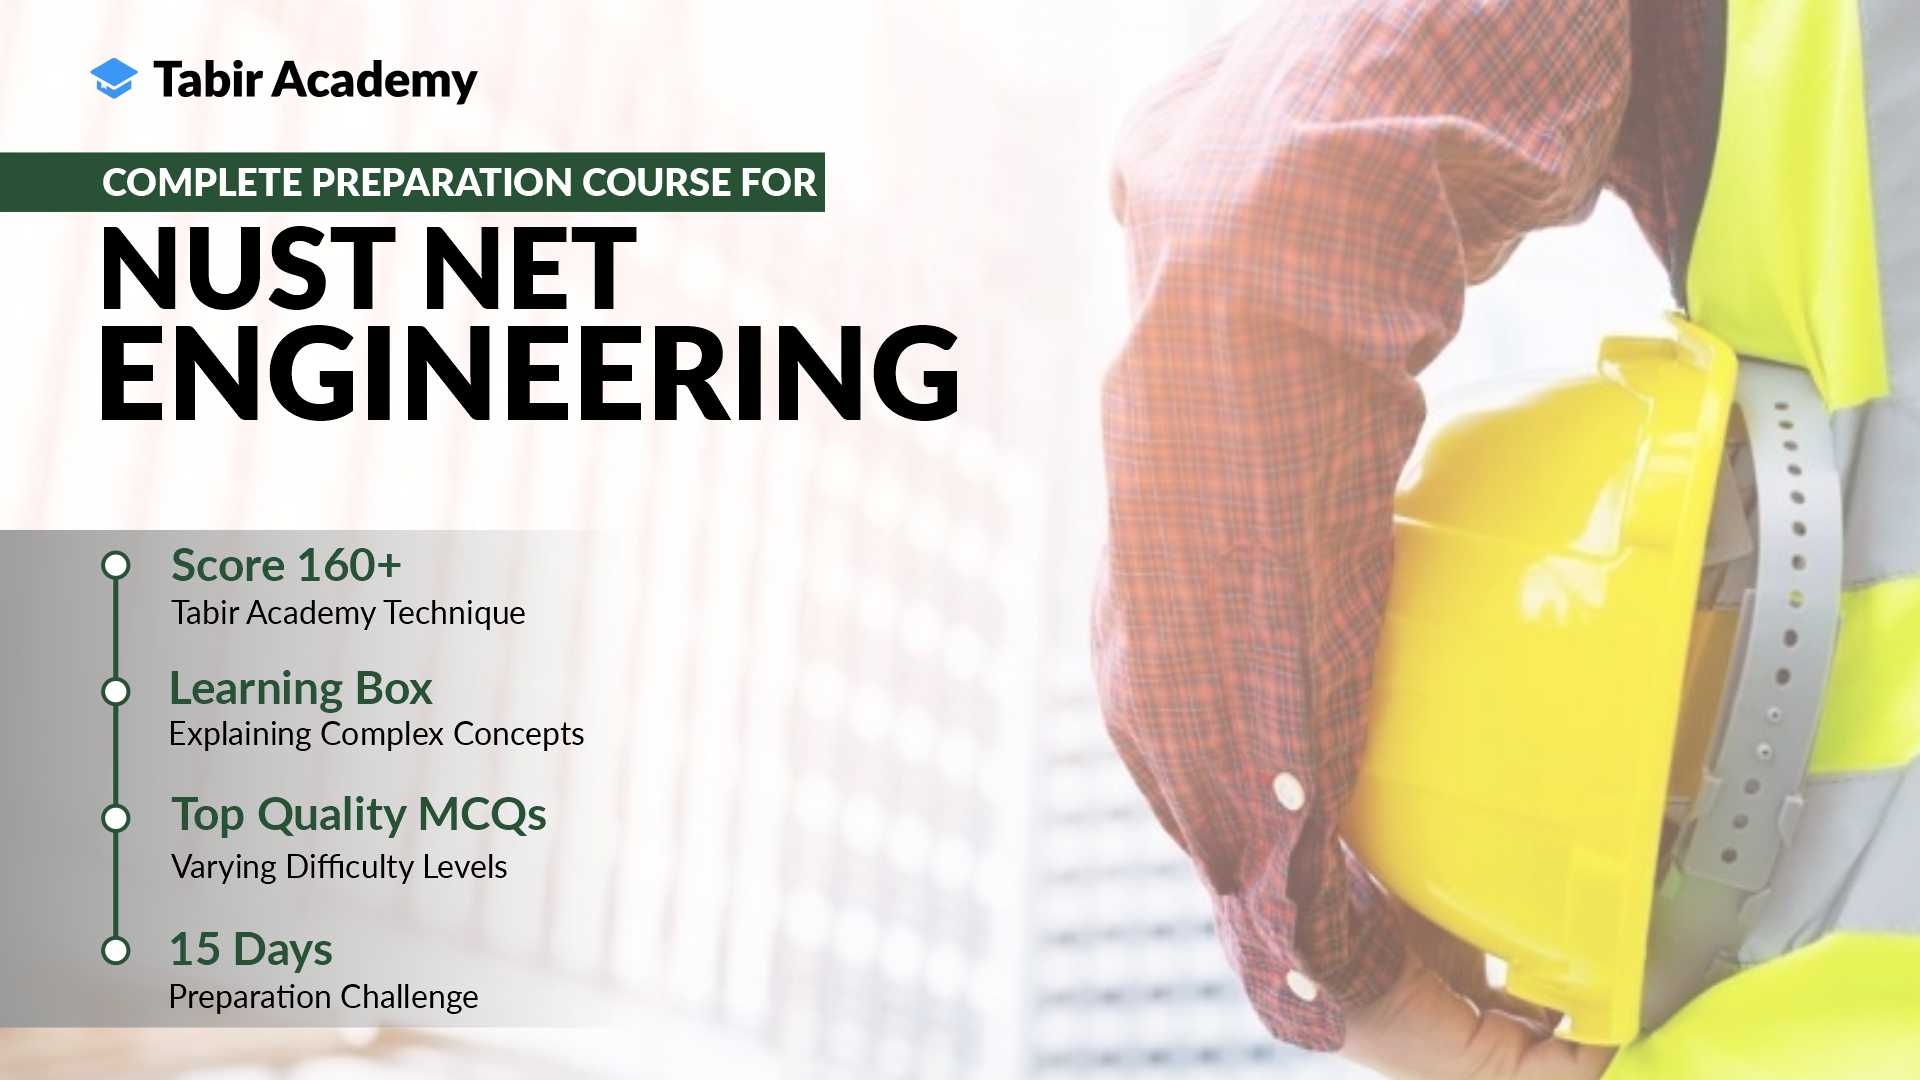 Complete Preparation Course for NUST NET Engineering